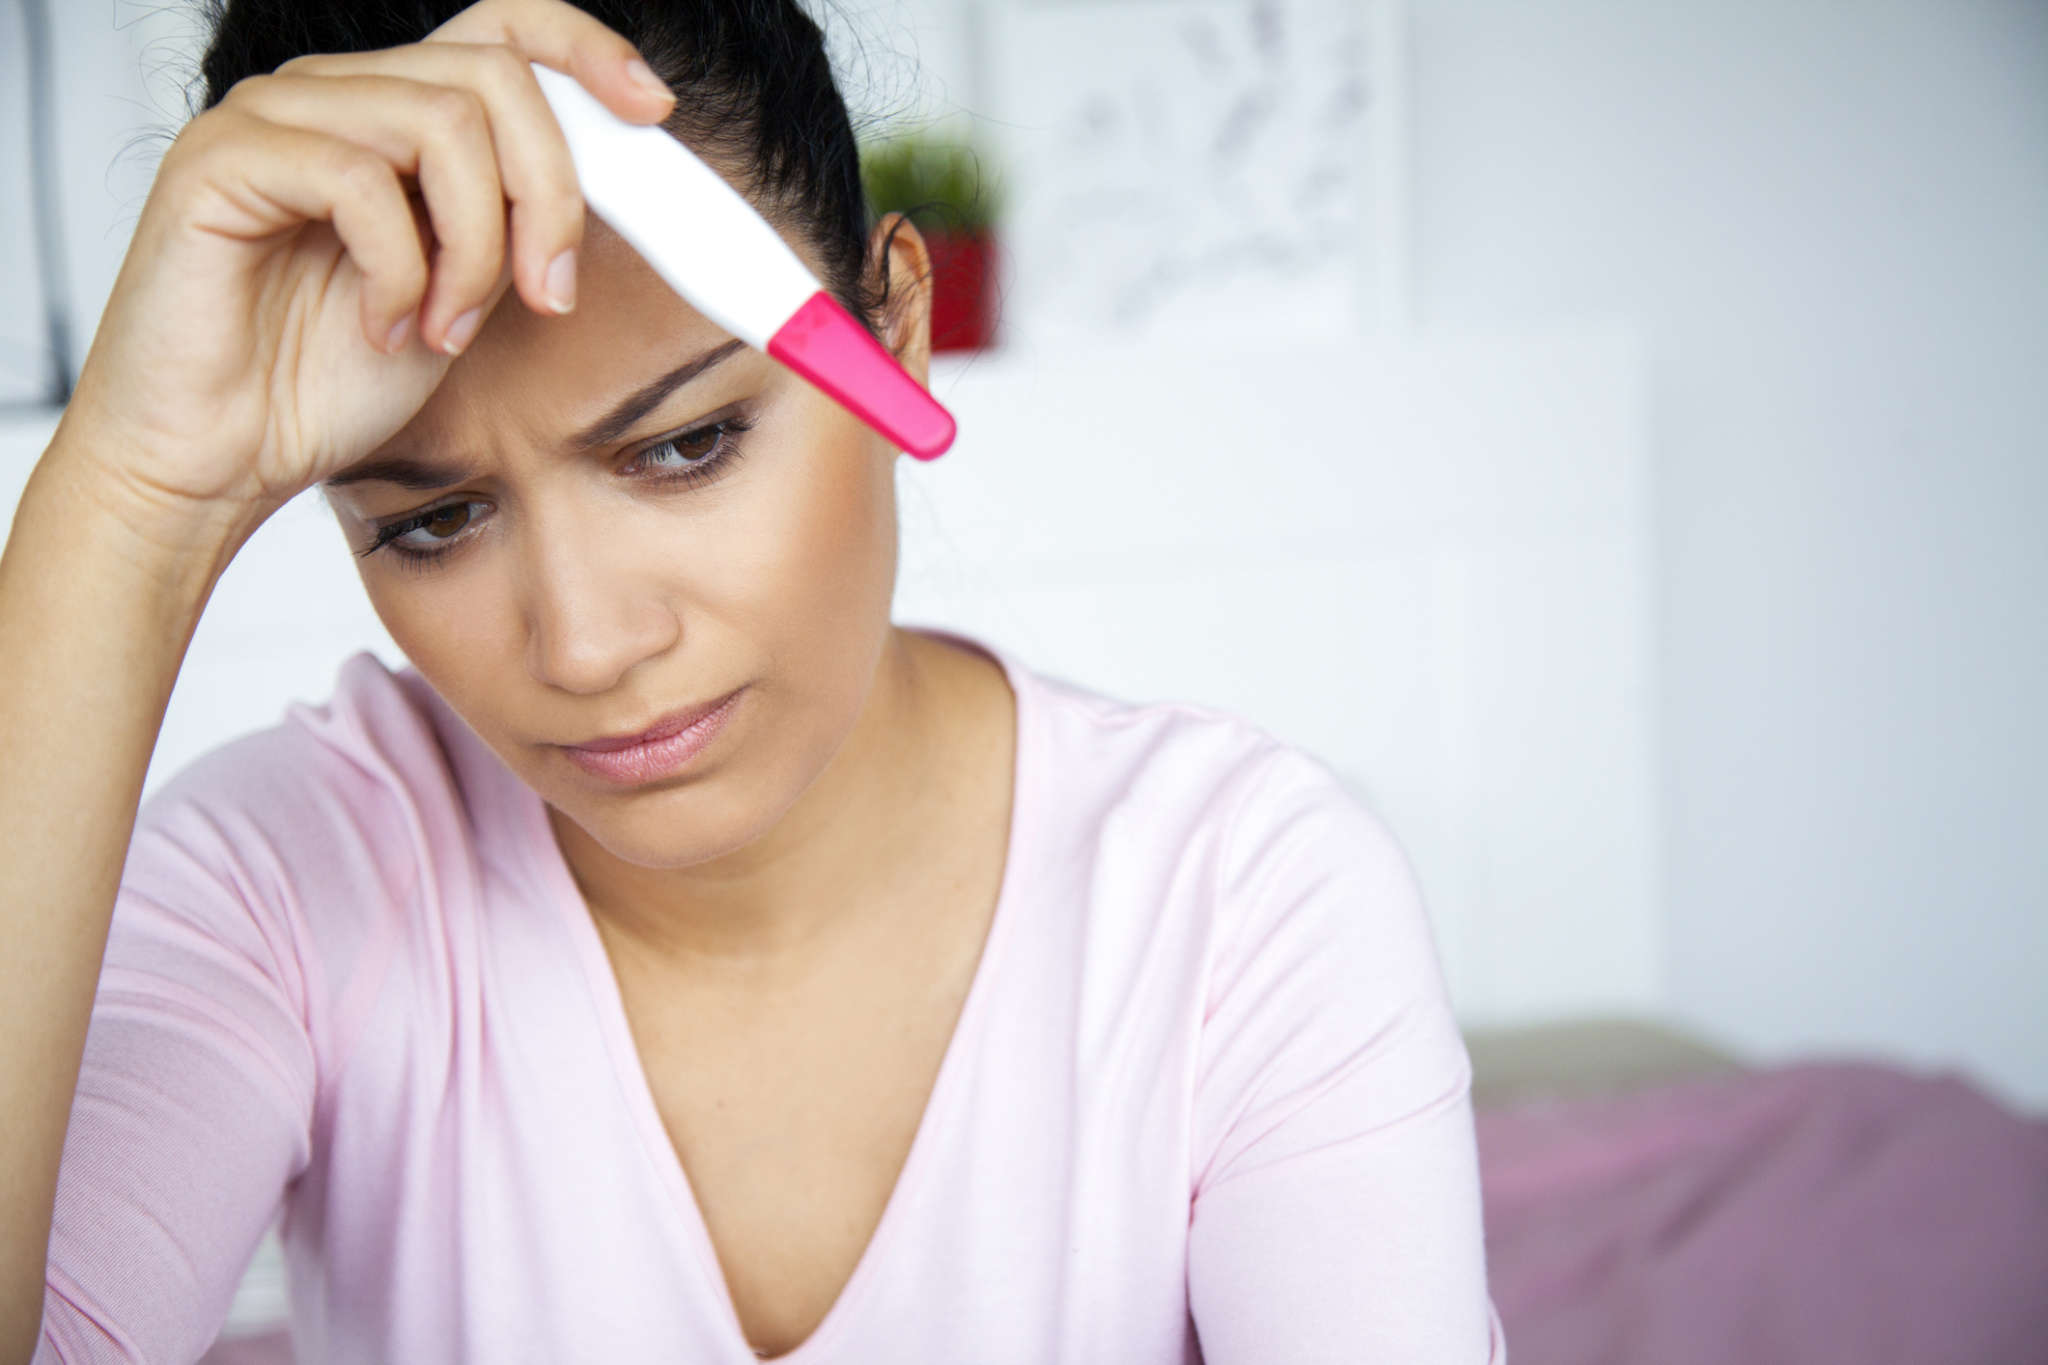 The 10 Truths of Infertility